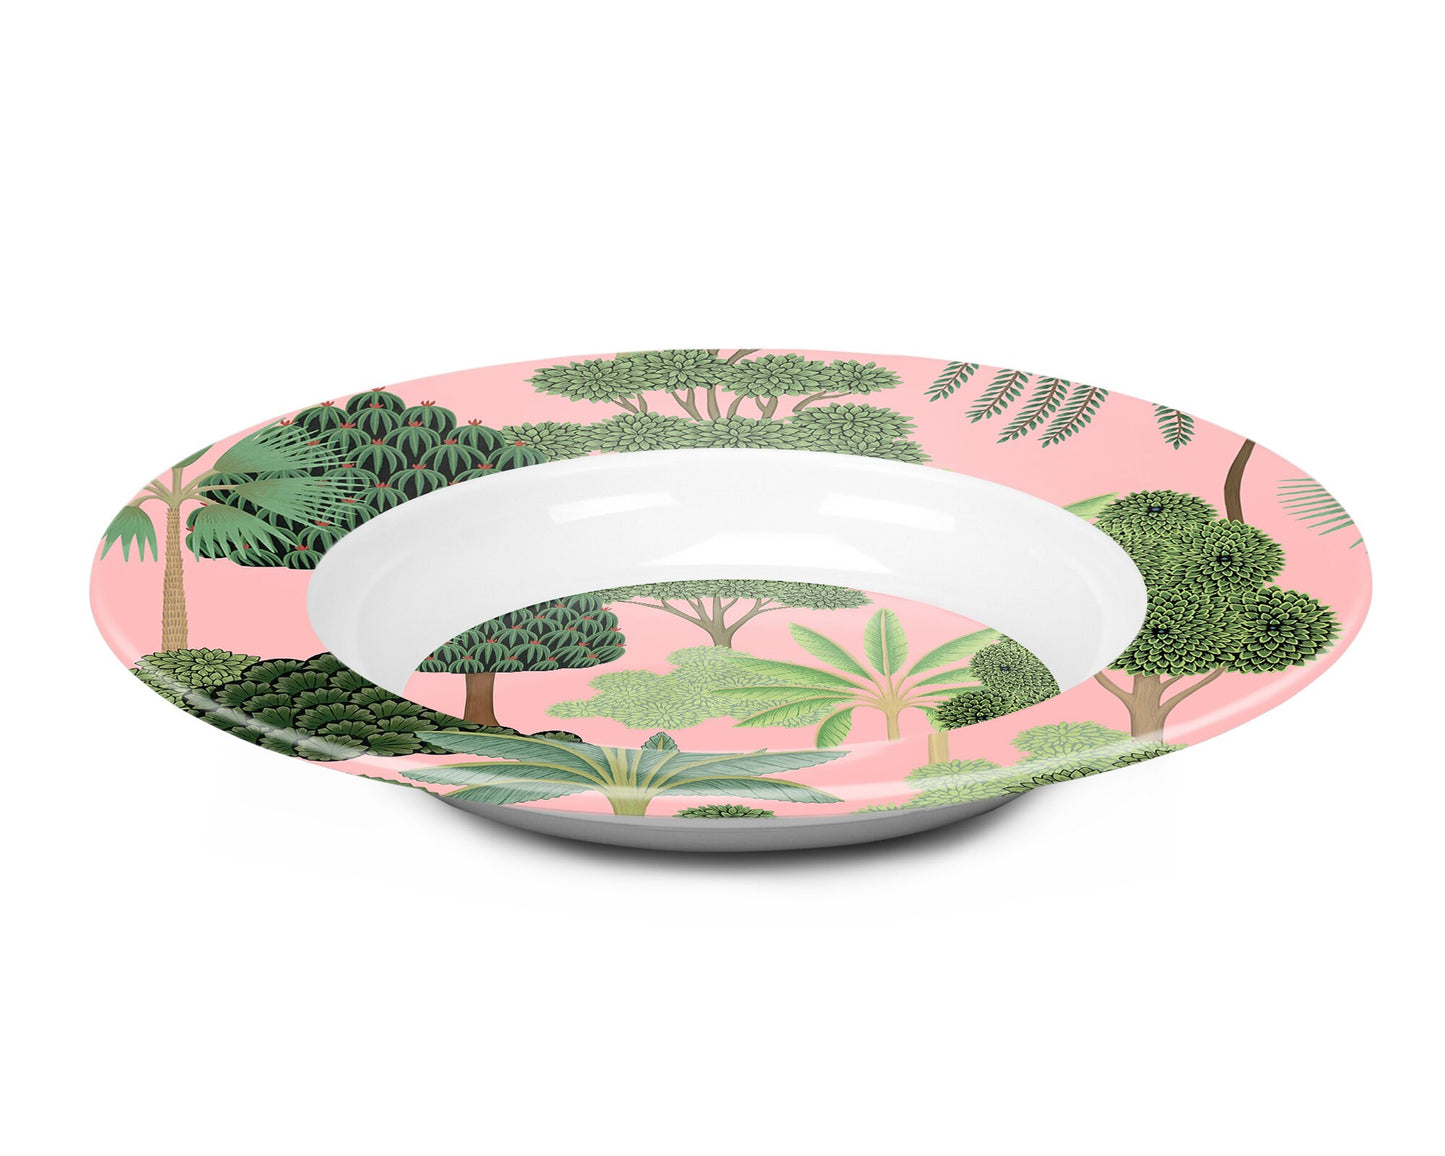 Tropical Trees Luxury Plastic Bowls Set of 4, Pink and Green Mughal Garden Palm Tree Print